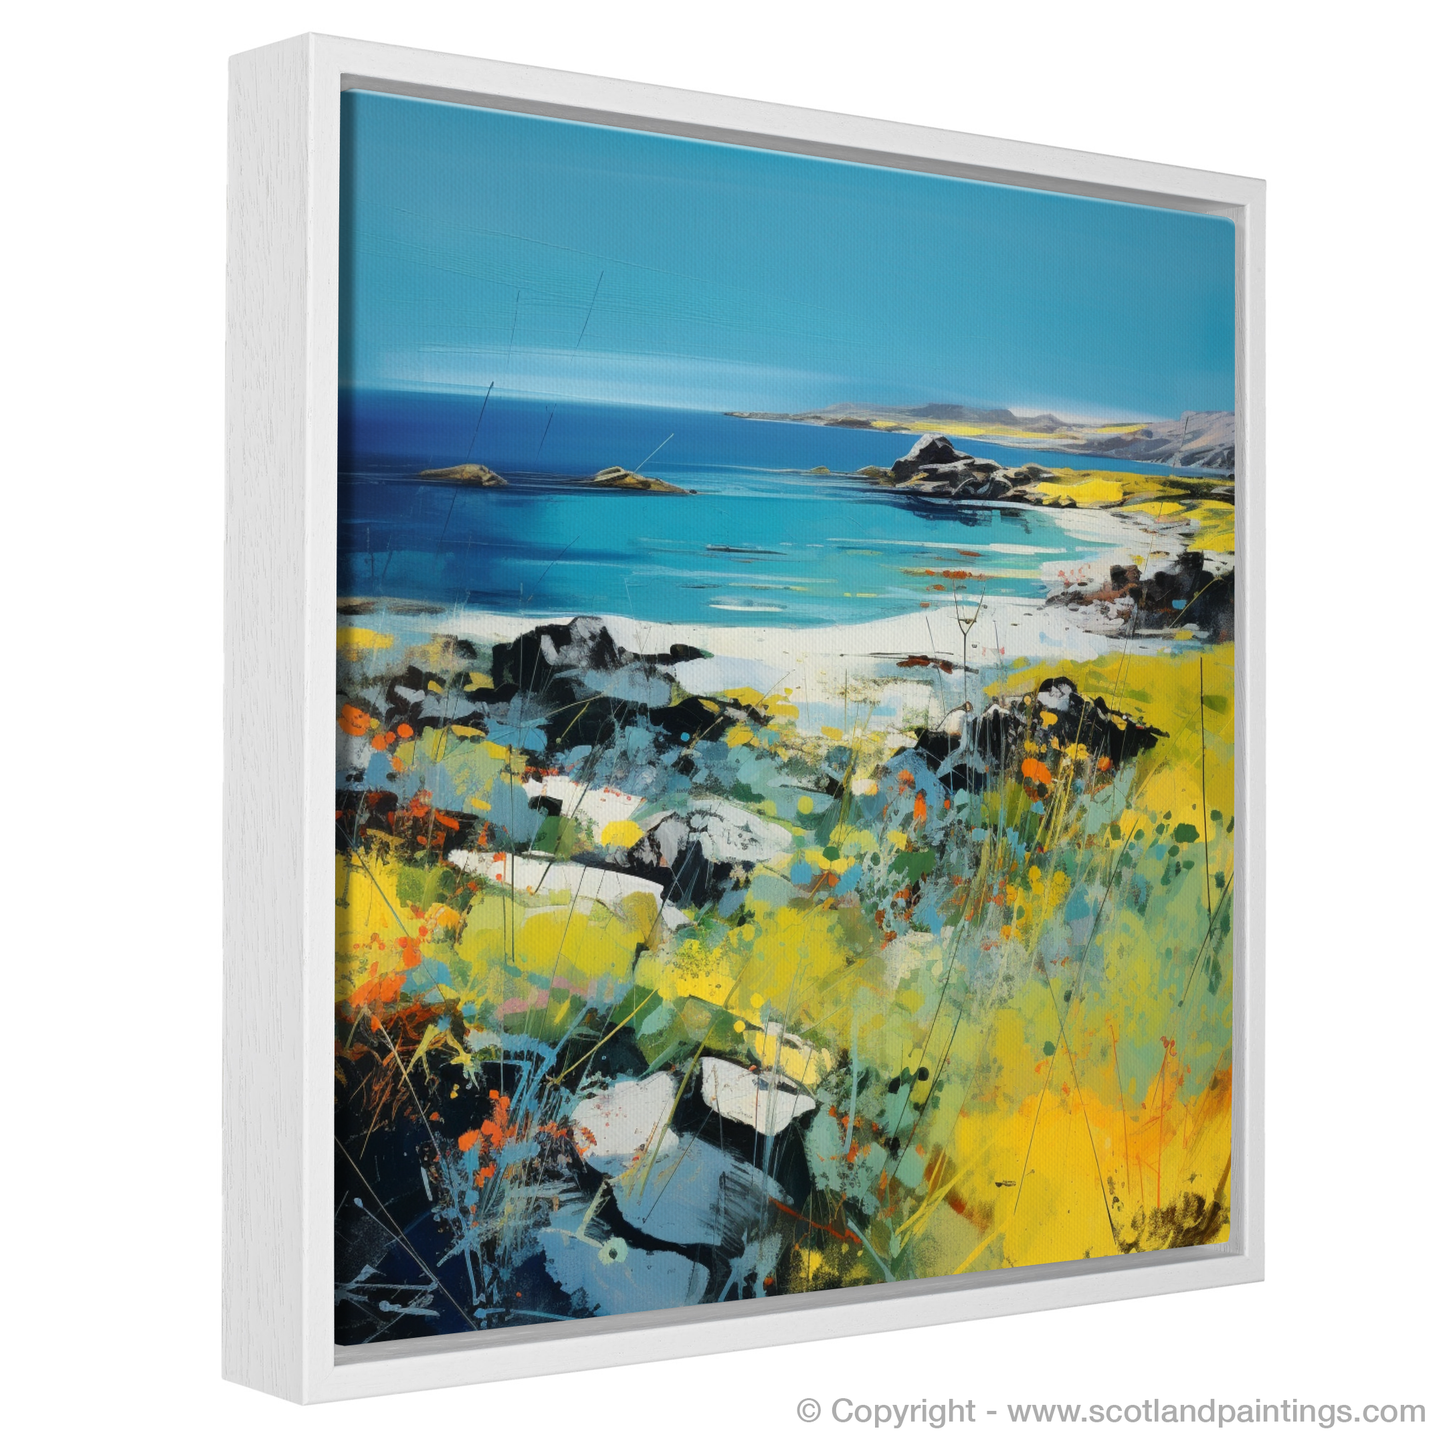 Isle of Colonsay Abstraction: A Scottish Summer Reverie